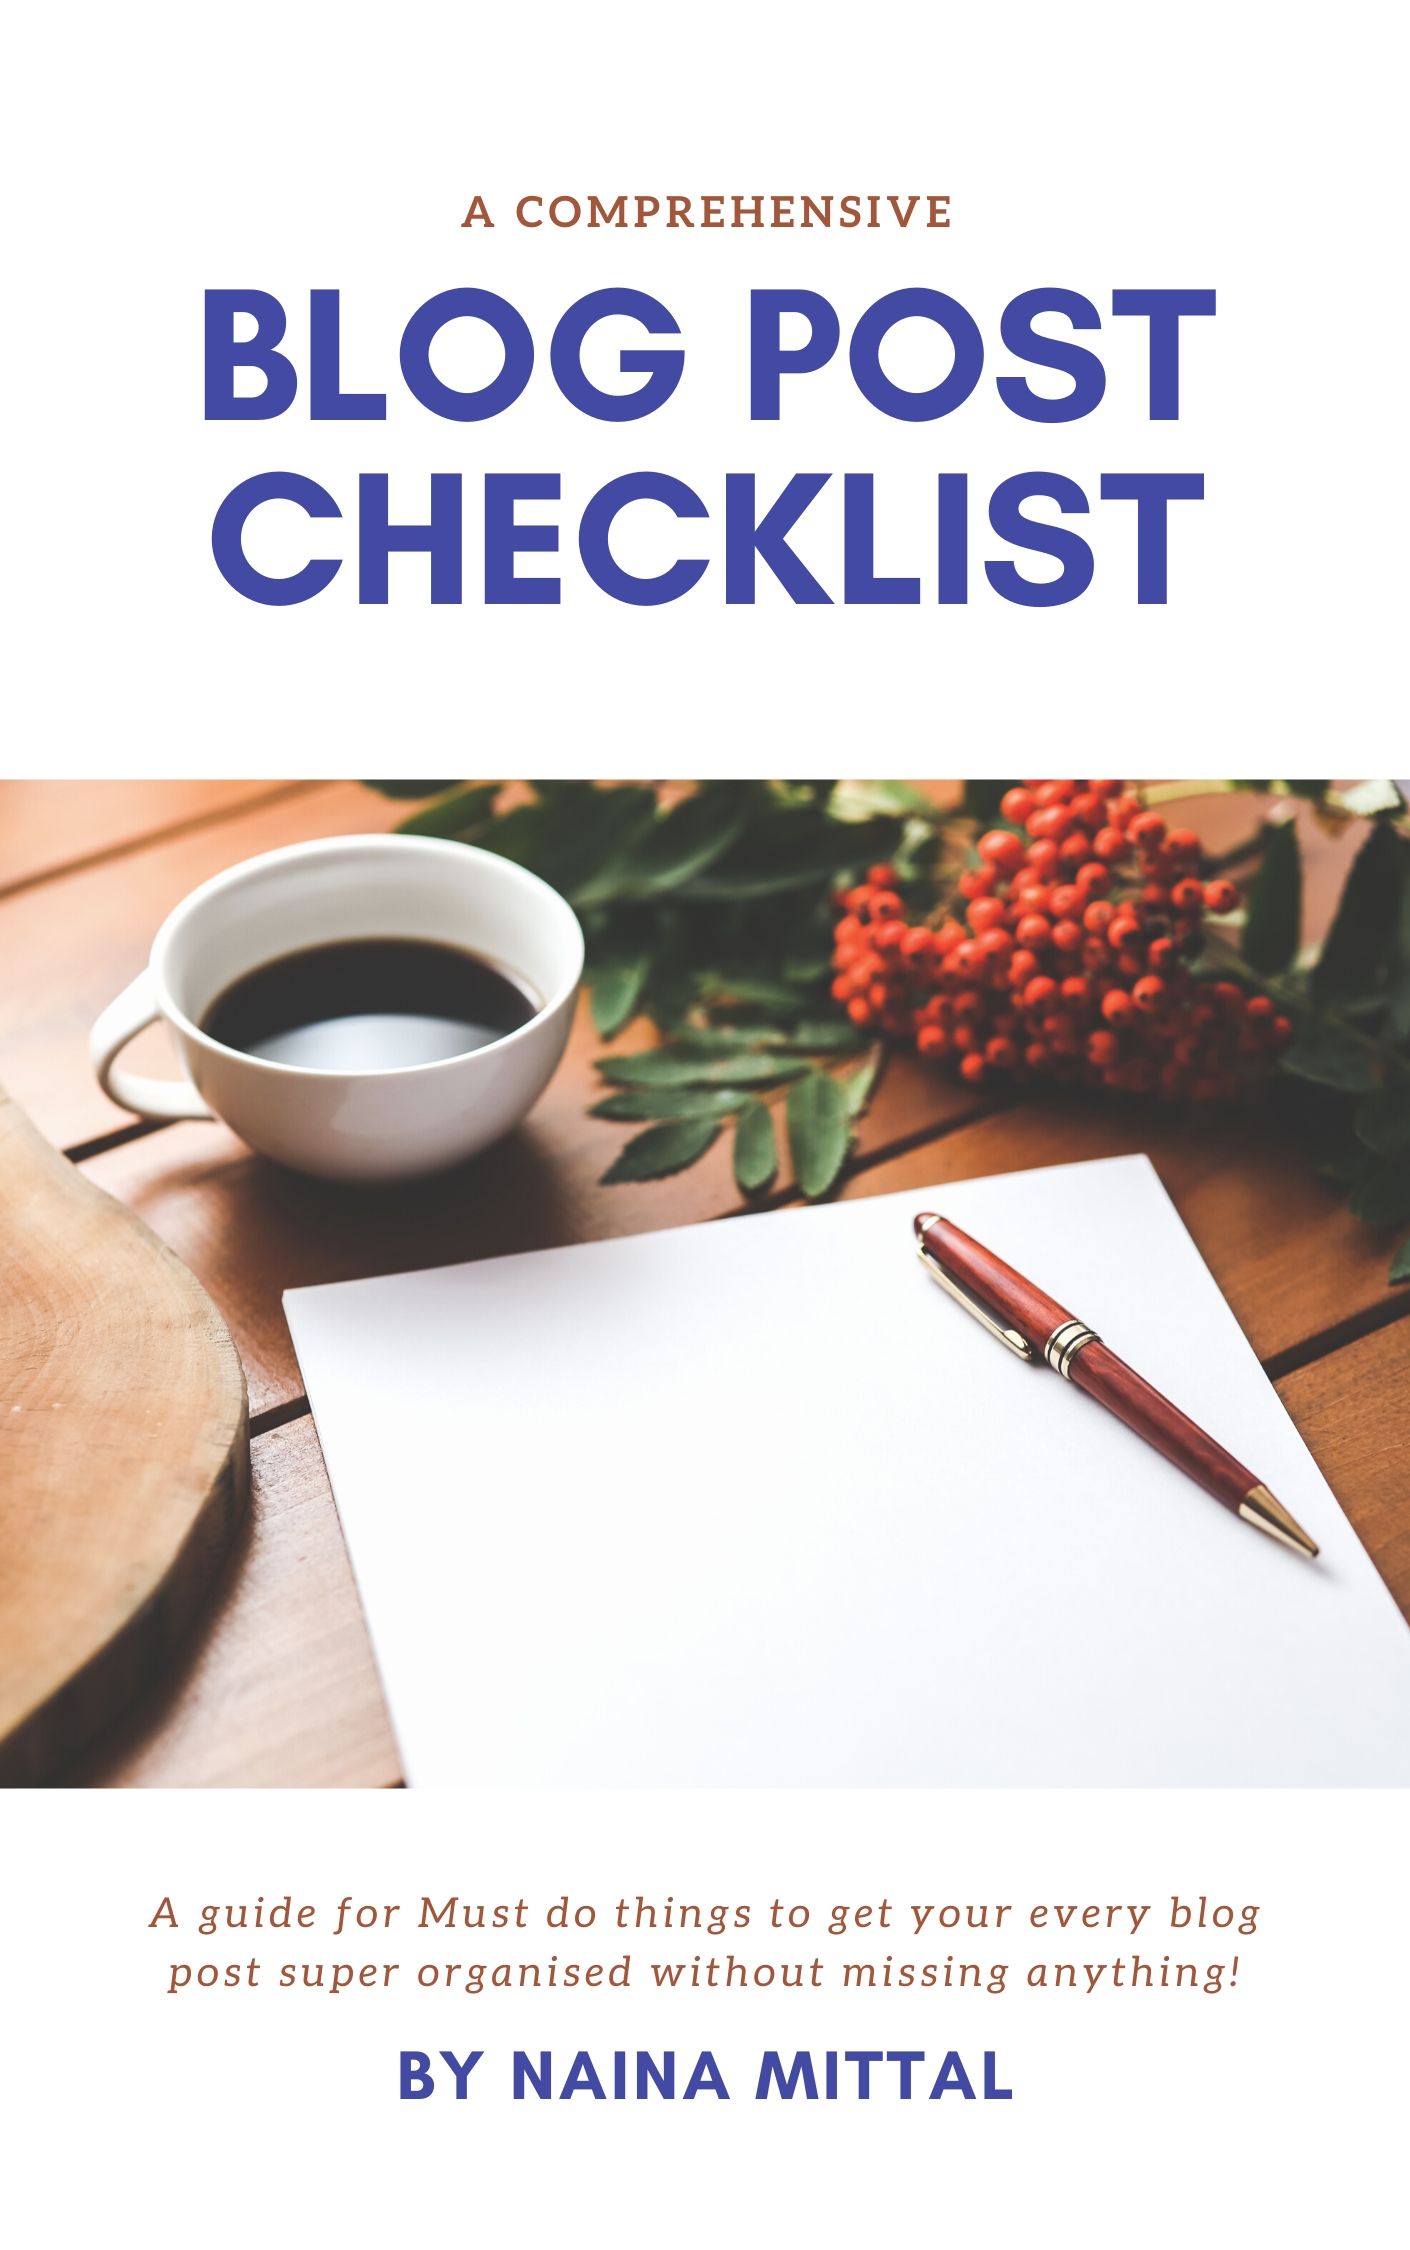 Stay organized with Blog post Checklist